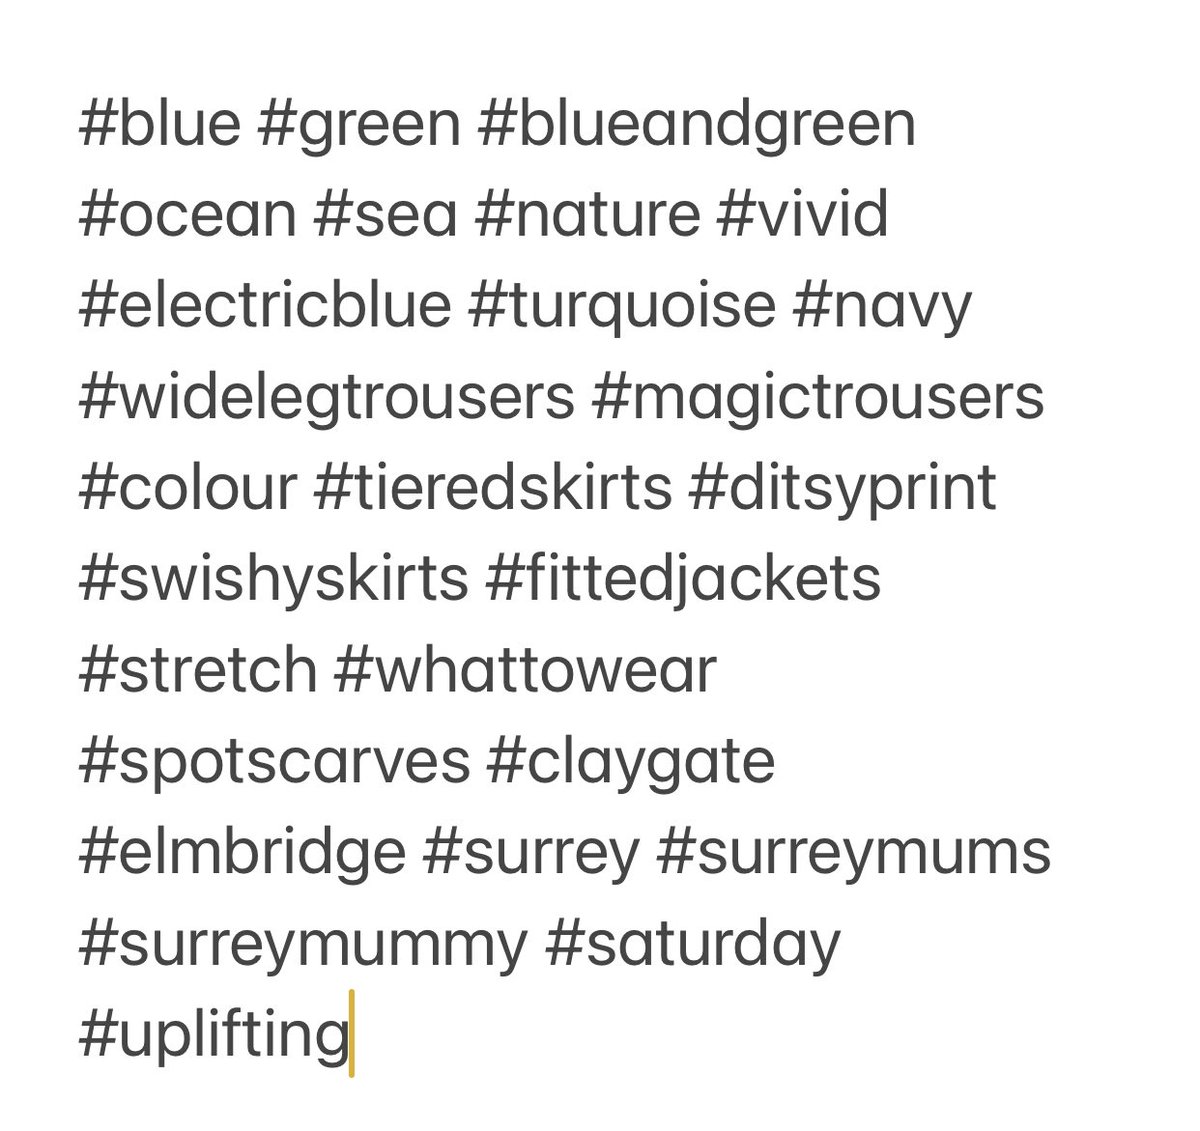 Blue and green should never be seen - or is it red and green? Either way I disagree - what do you think? 

#blue #green #blueandgreen #ocean #sea #nature #vivid #electricblue #turquoise #navy #widelegtrousers #magictrousers #colour #tieredskirts #ditsyprint #swishyskirts